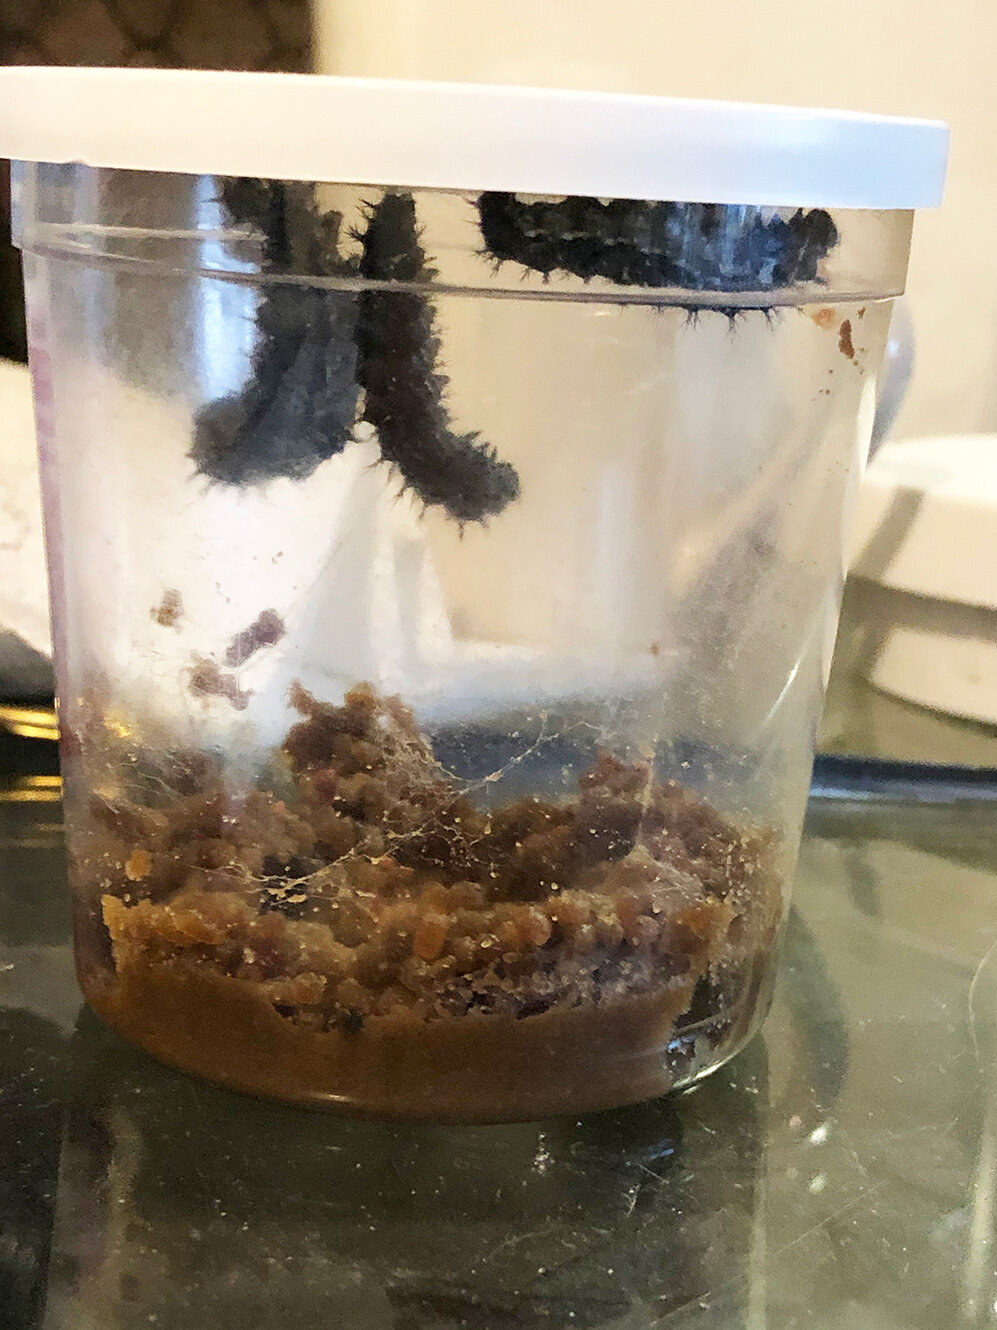  The caterpillars crawled to the top of the containers and prepared to form their cocoons by forming a “J” shape with their bodies. 